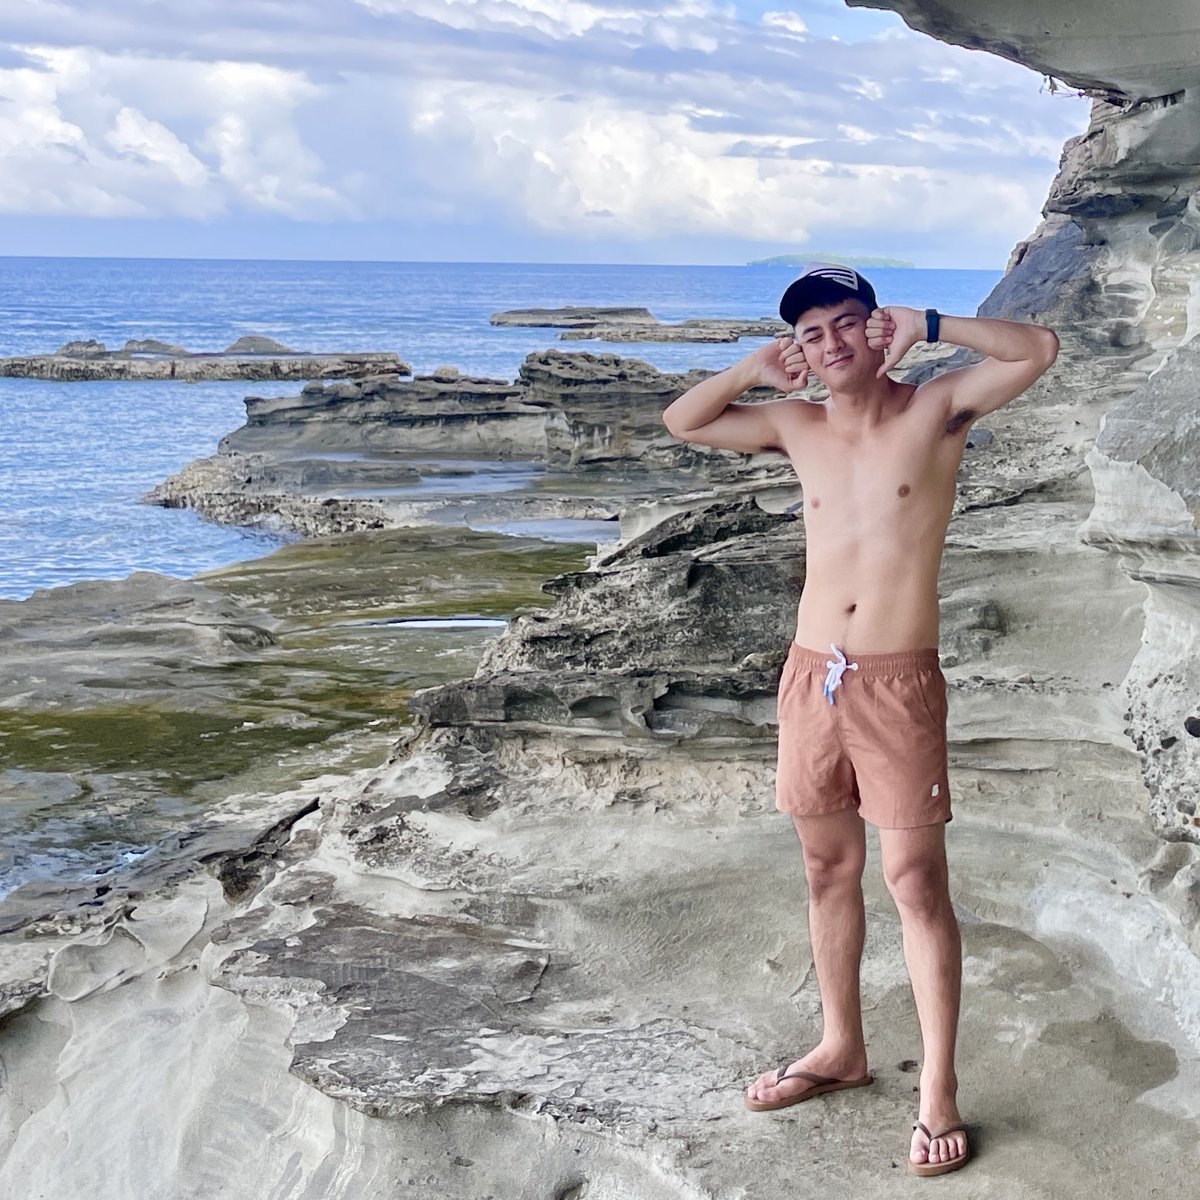 You might forget the pose, but not the attitude. 

#topless #travel2023 #dinagatislands